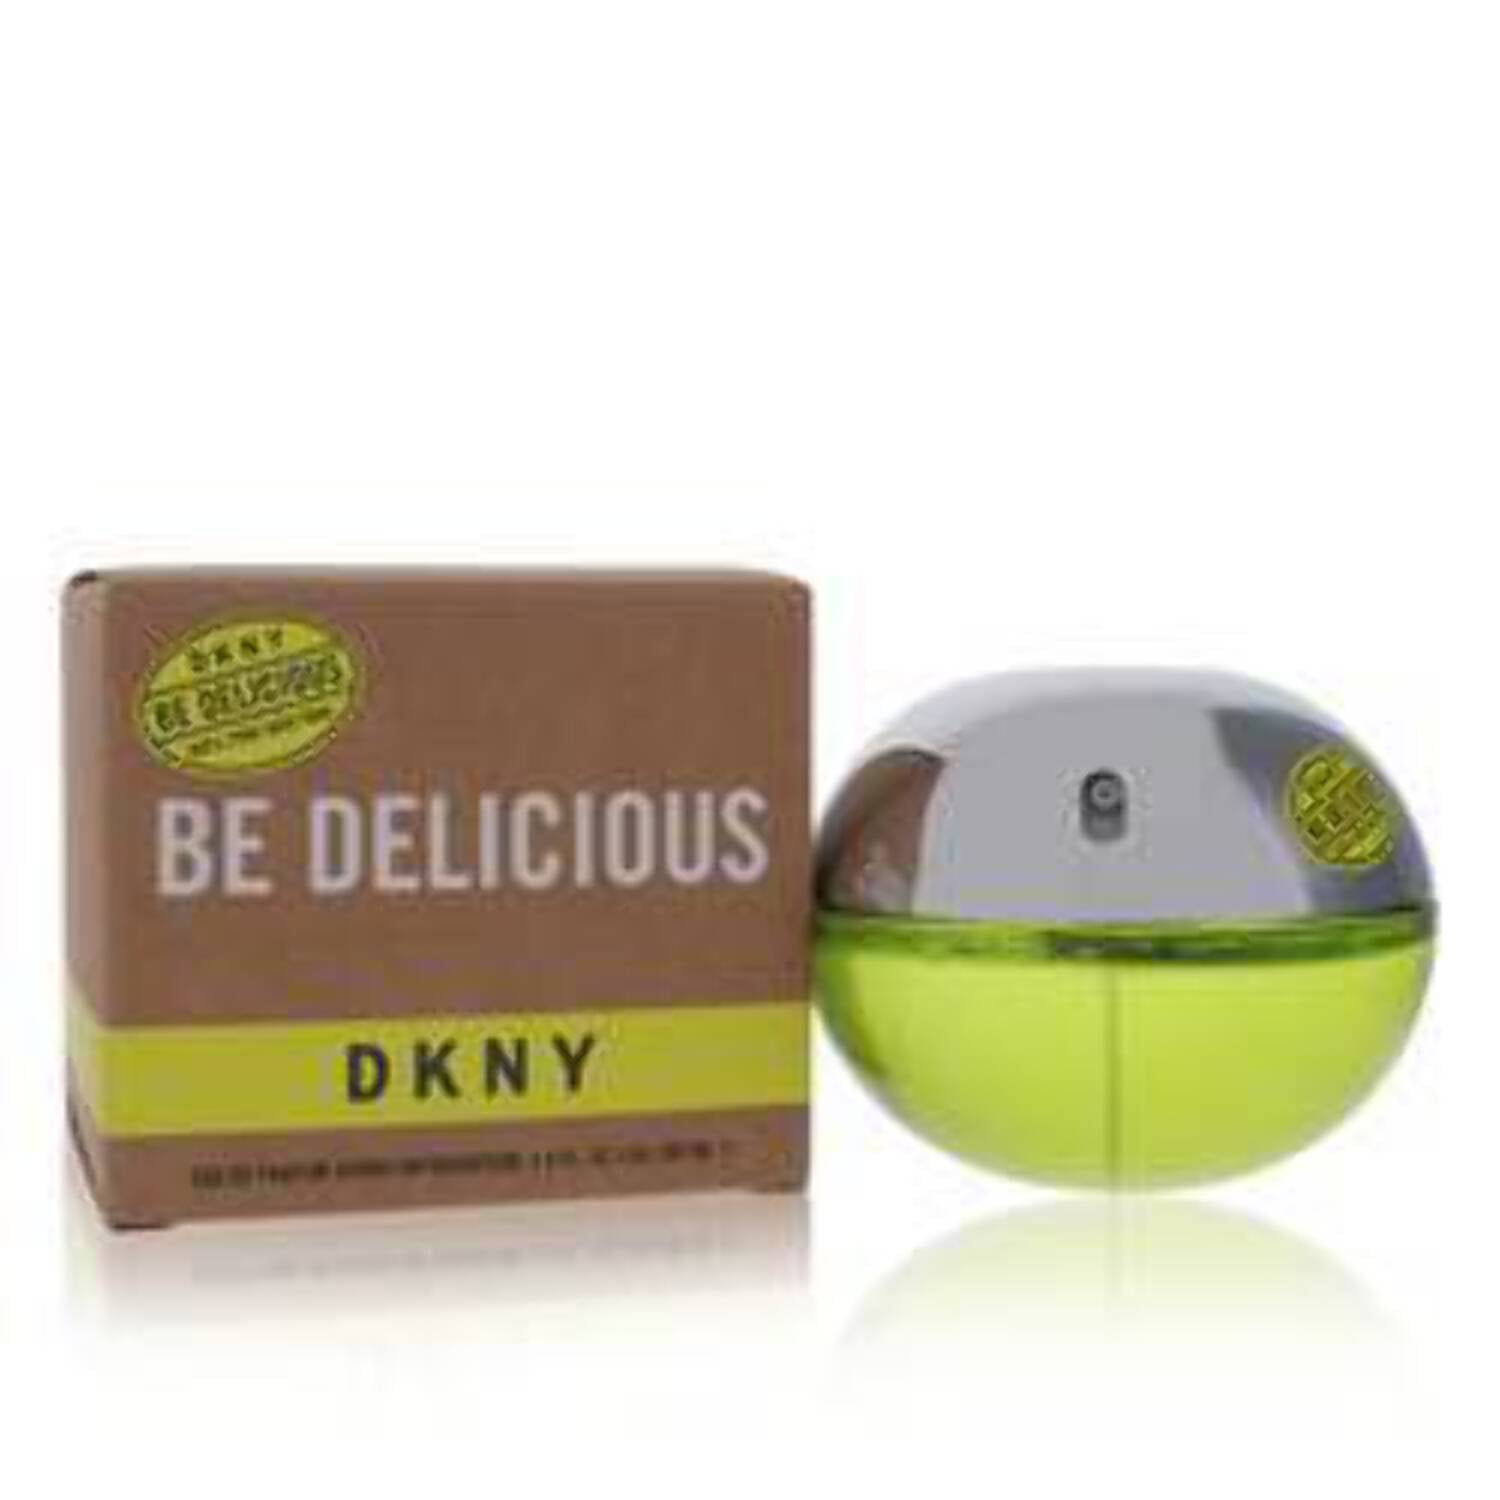 Be Delicious Dkny by Donna Karan EDP Perfume for Women 1.0 oz Brand New In  Box 22548296585